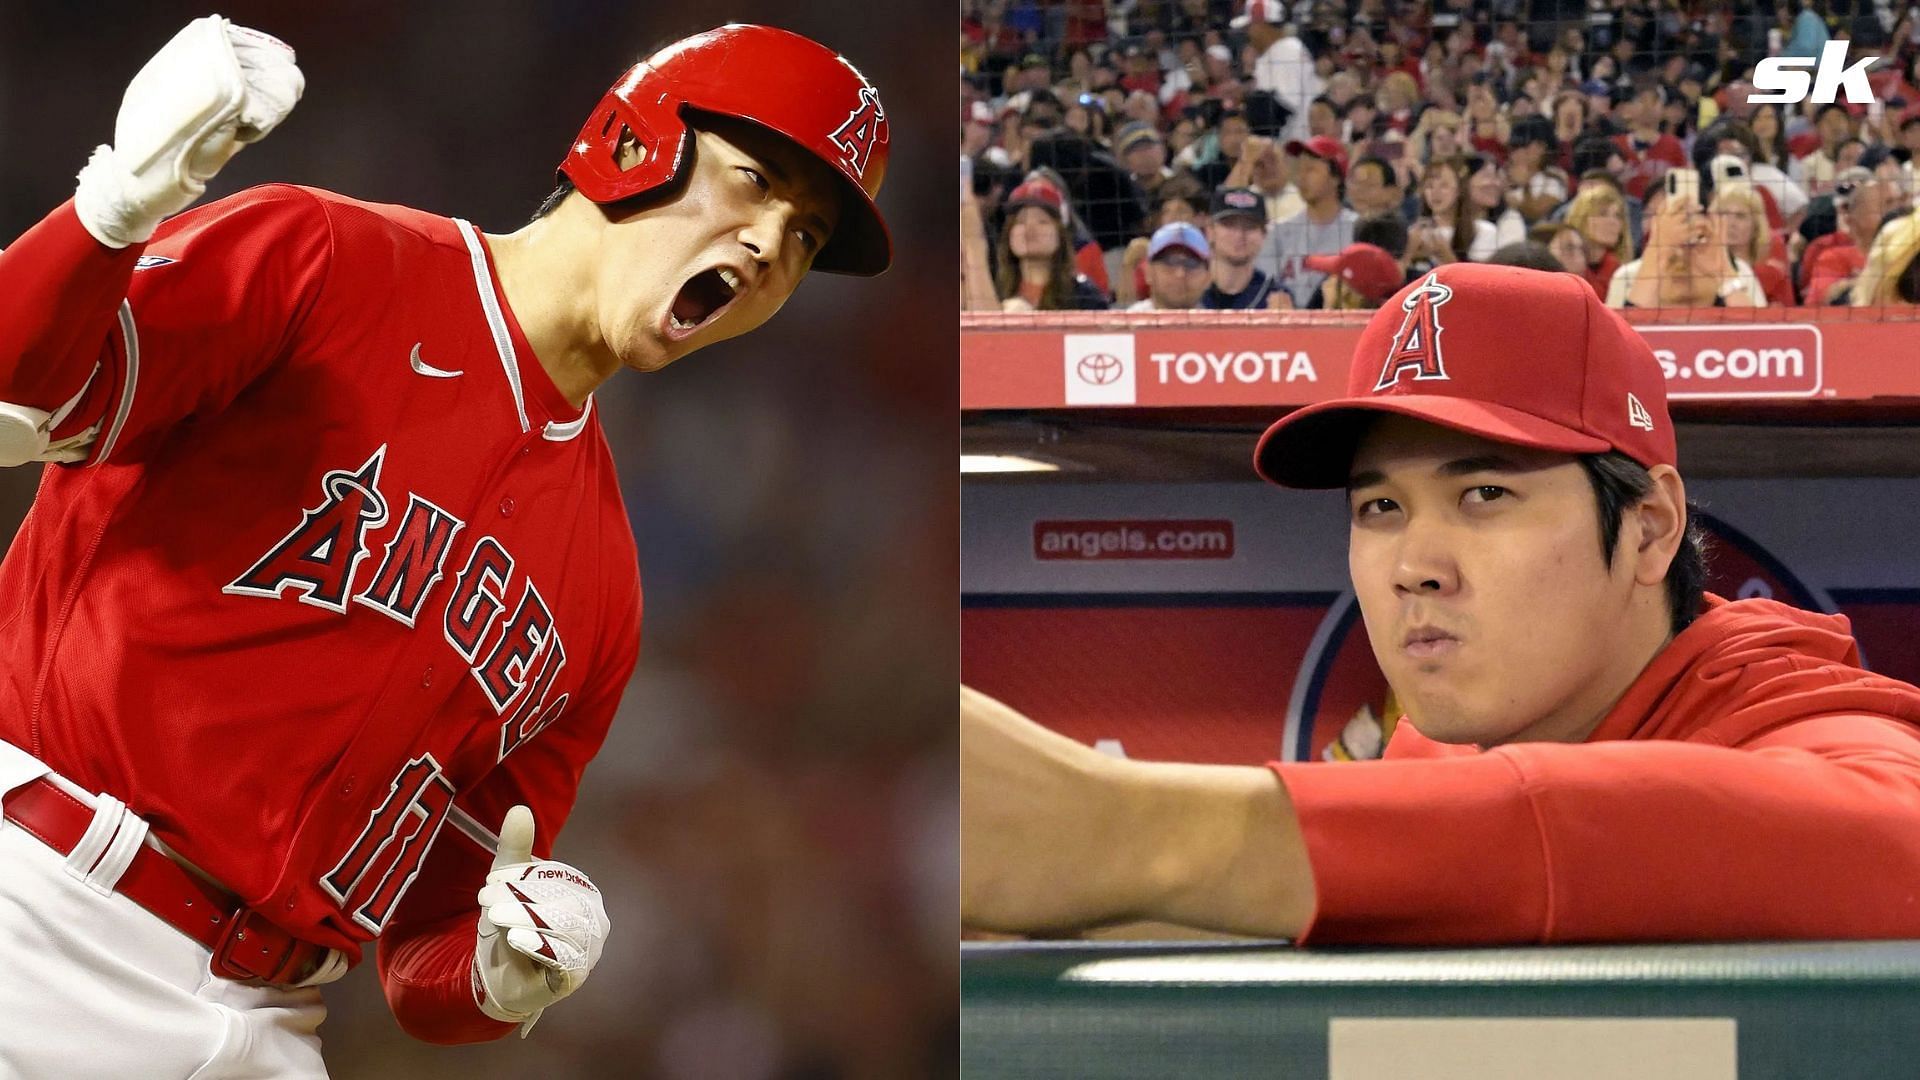 &quot;The nation of Canada is not happy&quot; - Top 10 funny memes as Shohei Ohtani